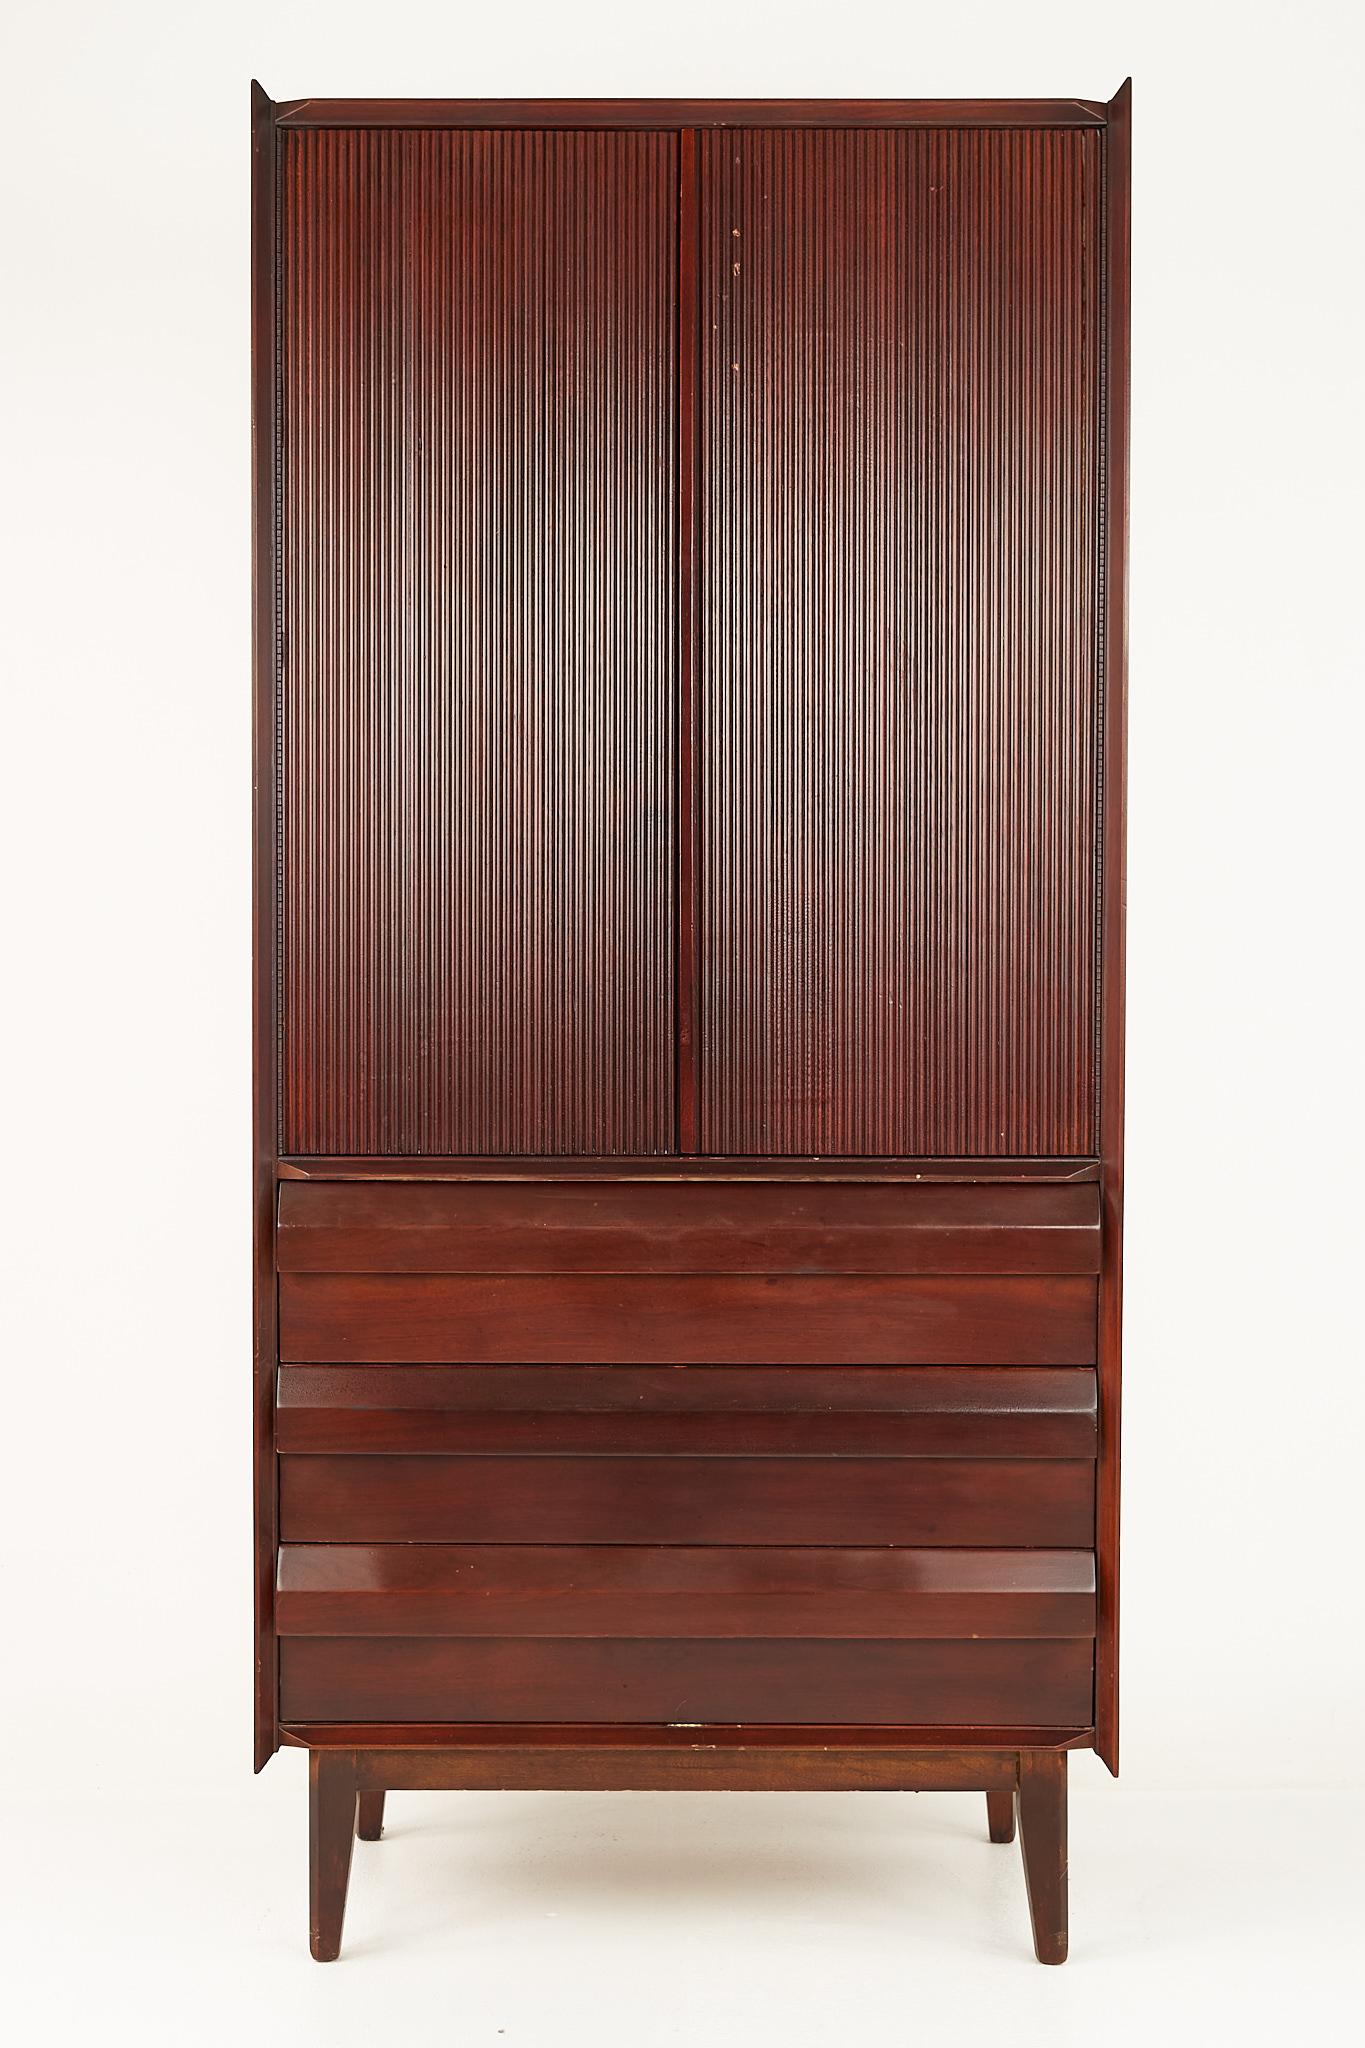 Lane First Edition mid-century gentlemans chest armoire

This armoire measures: 31.75 wide x 18 deep x 69 inches high

All pieces of furniture can be had in what we call restored vintage condition. That means the piece is restored upon purchase